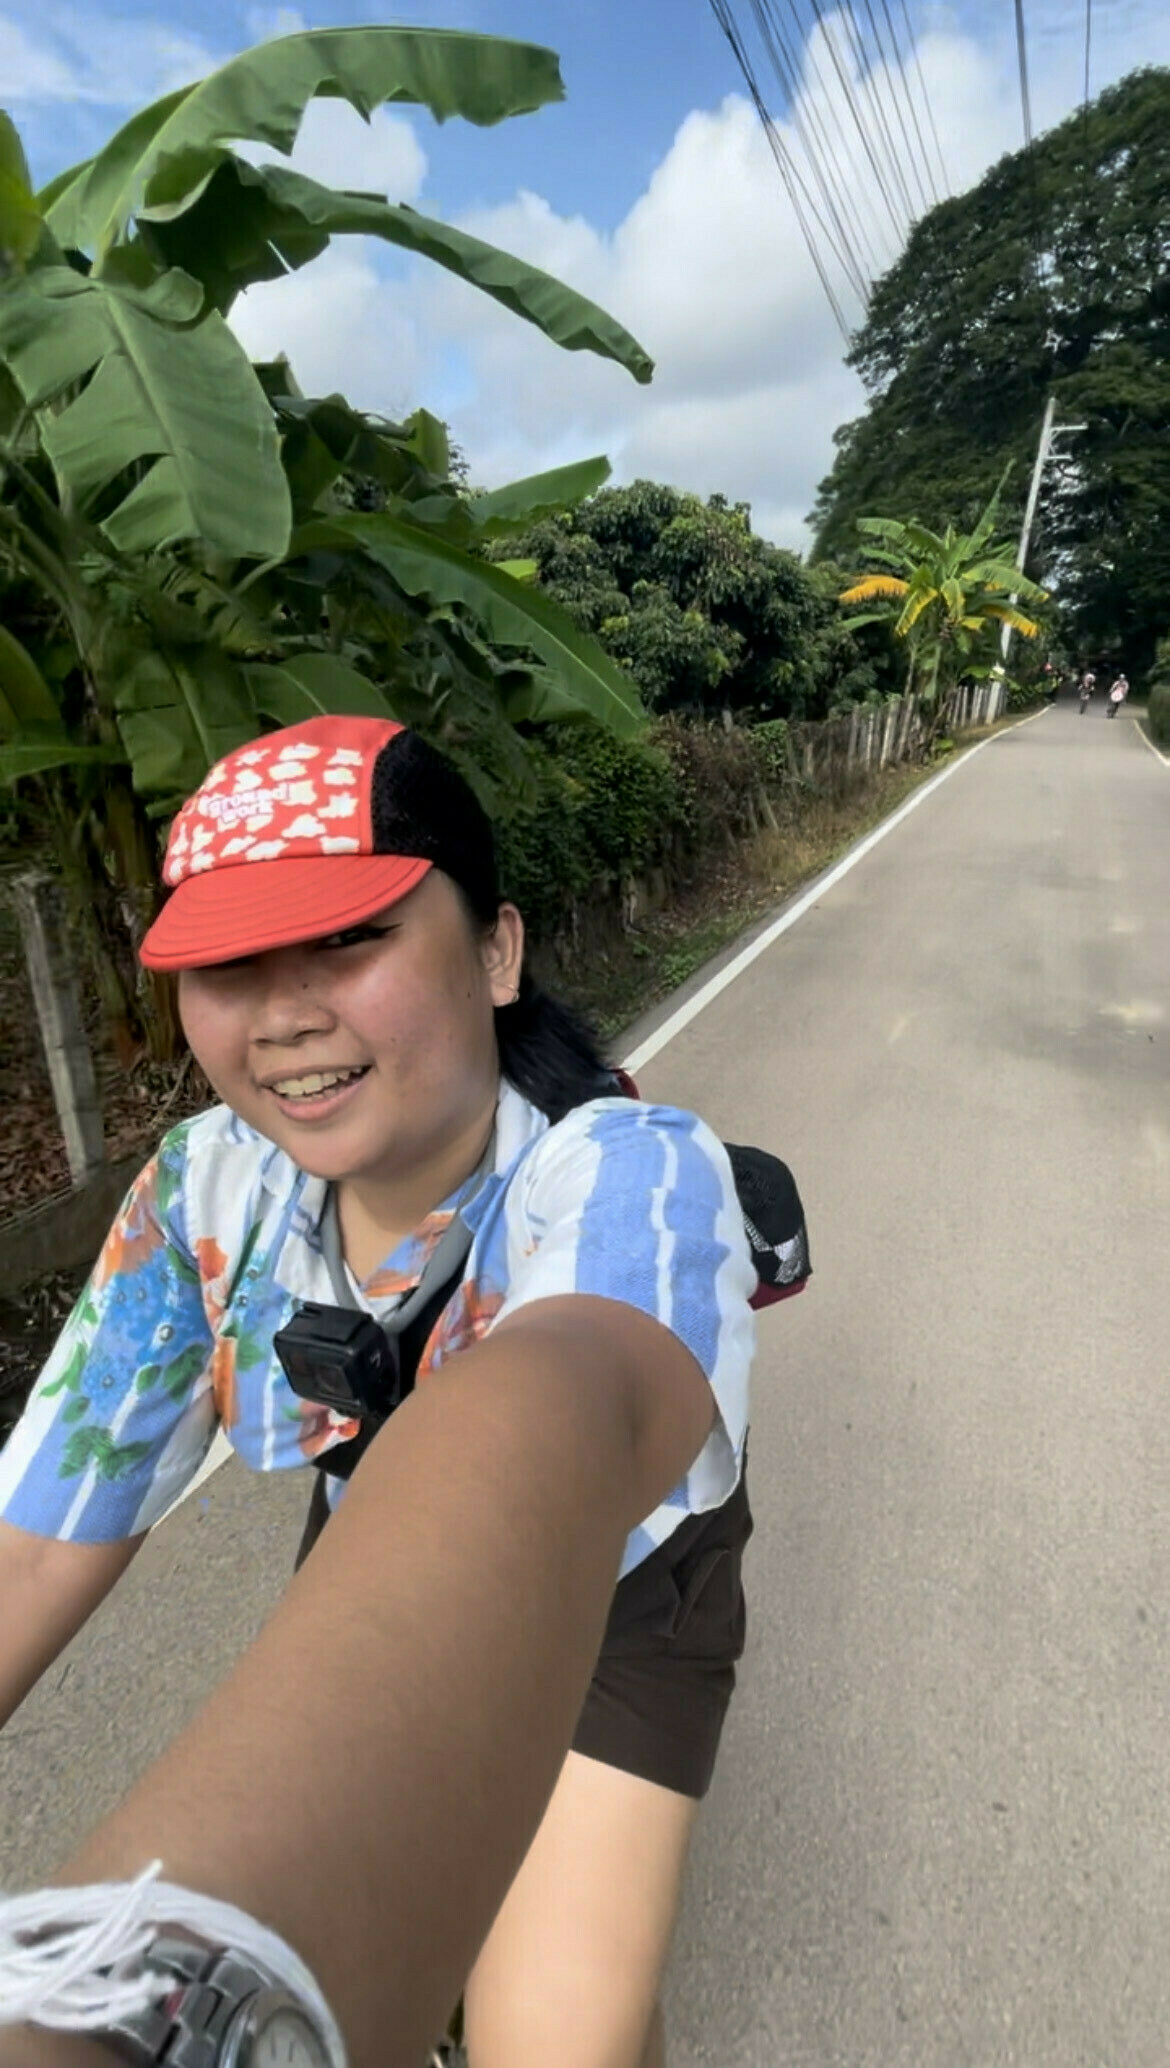 Wide angle selfie of Chi riding a bike, wearing her red popcorn cycling cap, kumot crop top, and black shorts, riding along one of the roads around the MueangKaen municipality at Chiang Mai, Thailand. Behind her are some trees, and the road is narrow enough for one person on a bike to pass with ease.